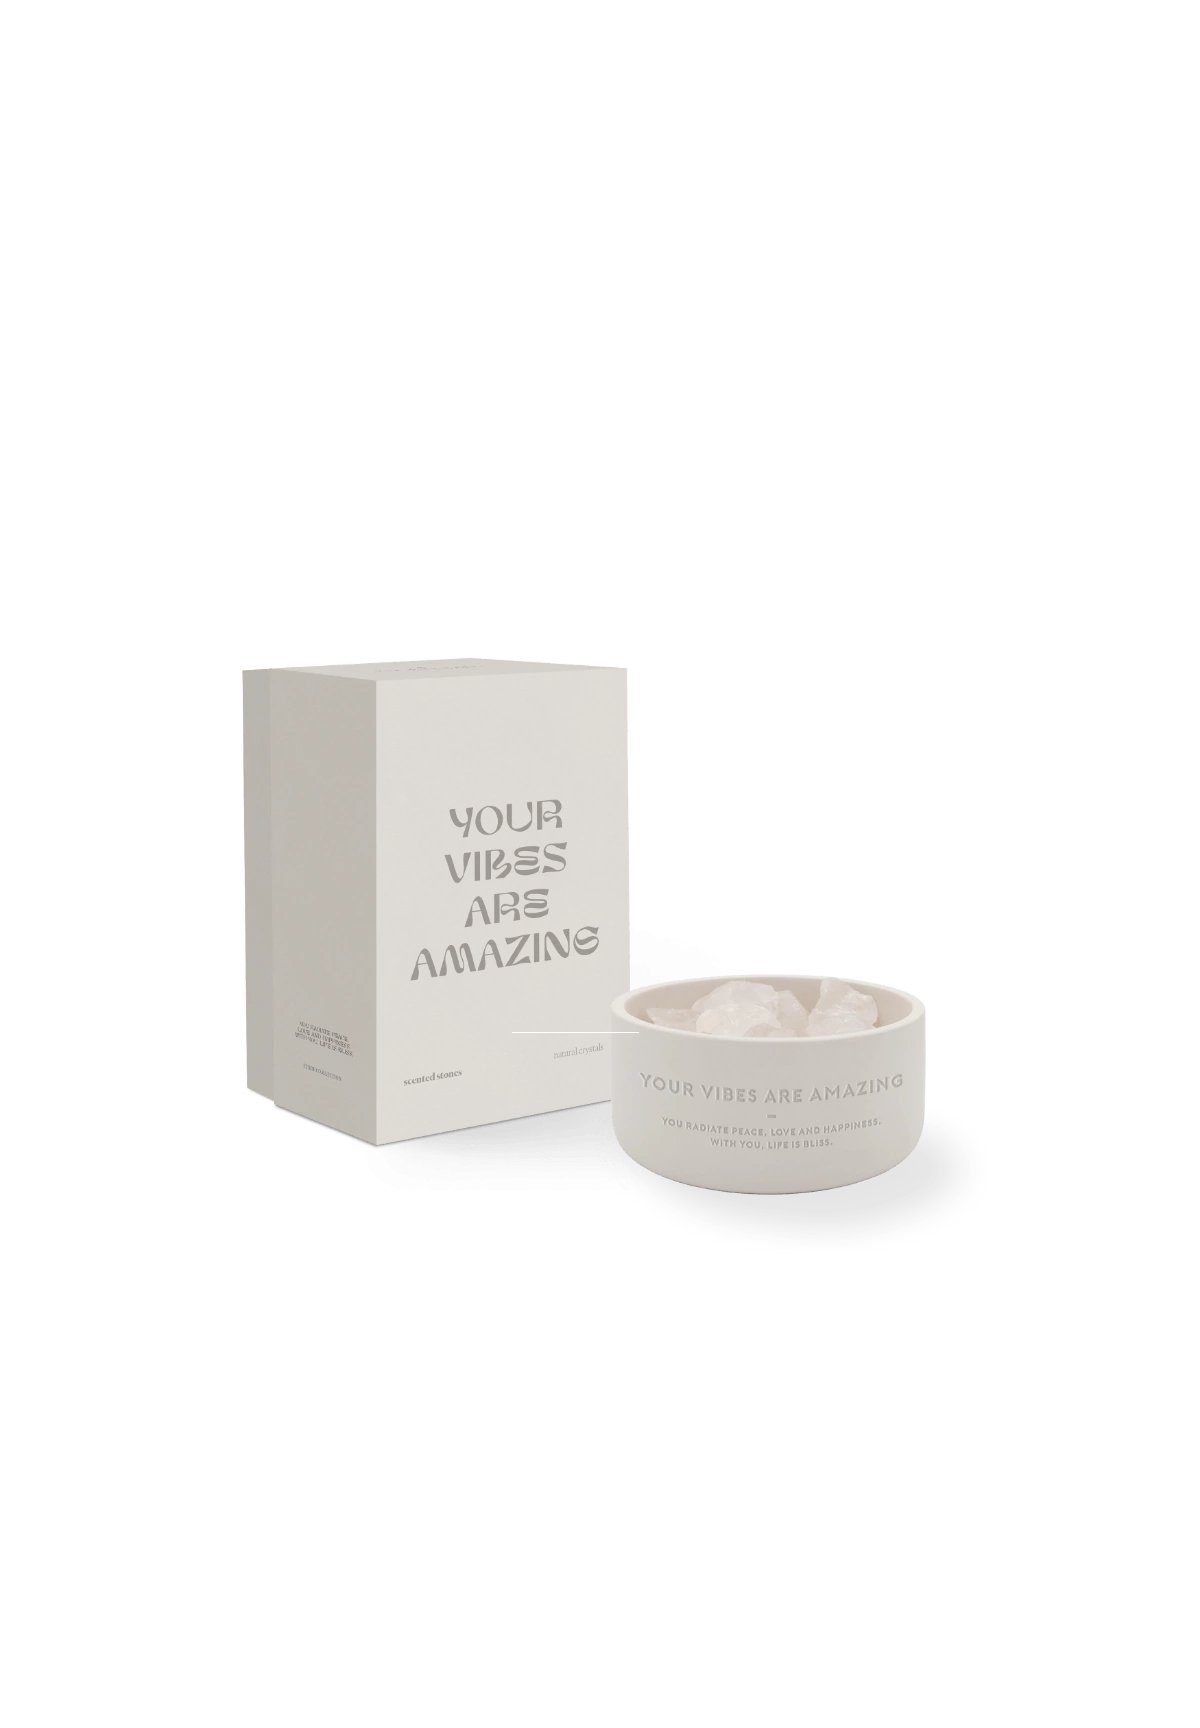 Are Orange LABEL - Amber & Amazing Your Blossom Vibes Mineral GIFT Raumduft THE